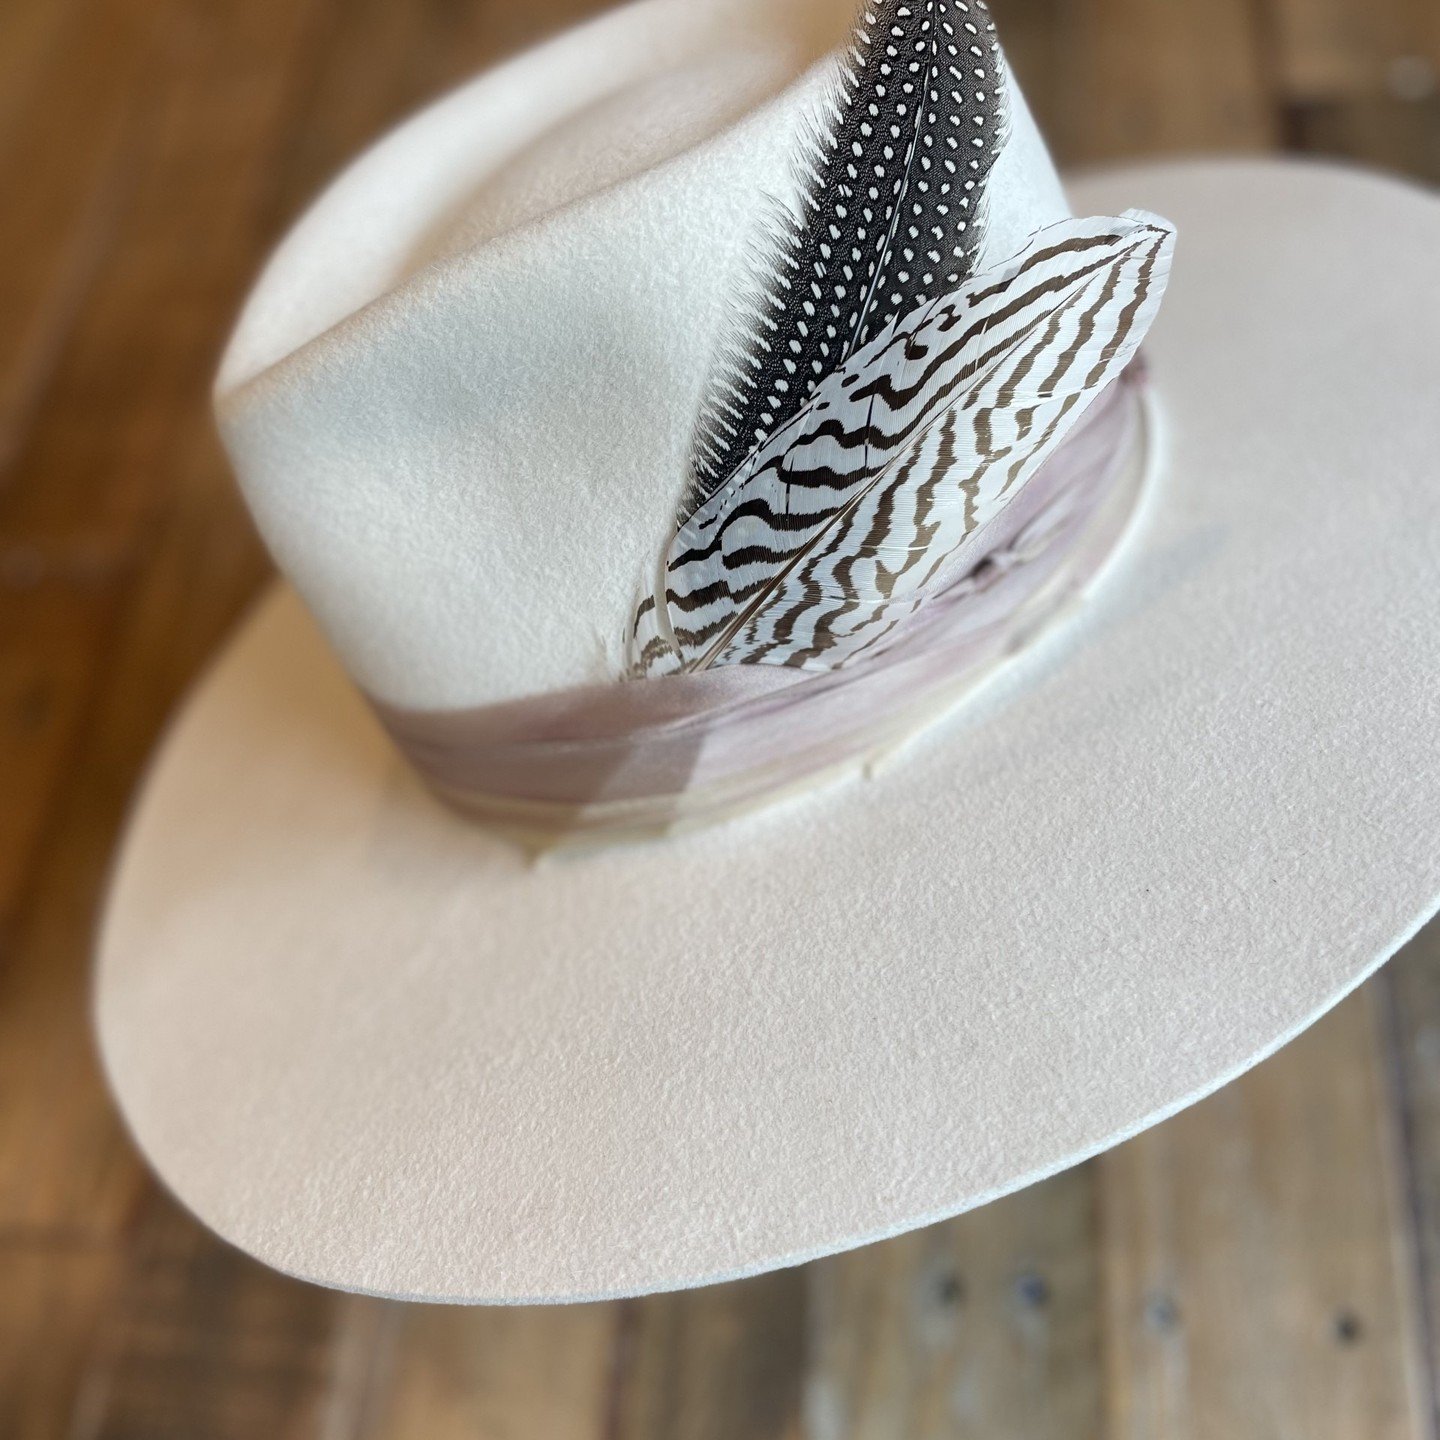 We're 6 days away from the Garden Tour! Here is a sneak peek of one of our ready to wear hats. Brimroad will be a featured boutique at the 2024 Garden Tour on May 7th (10-5pm) @ The San Francisco Yacht Club. Come shop our hat line!

https://www.marin